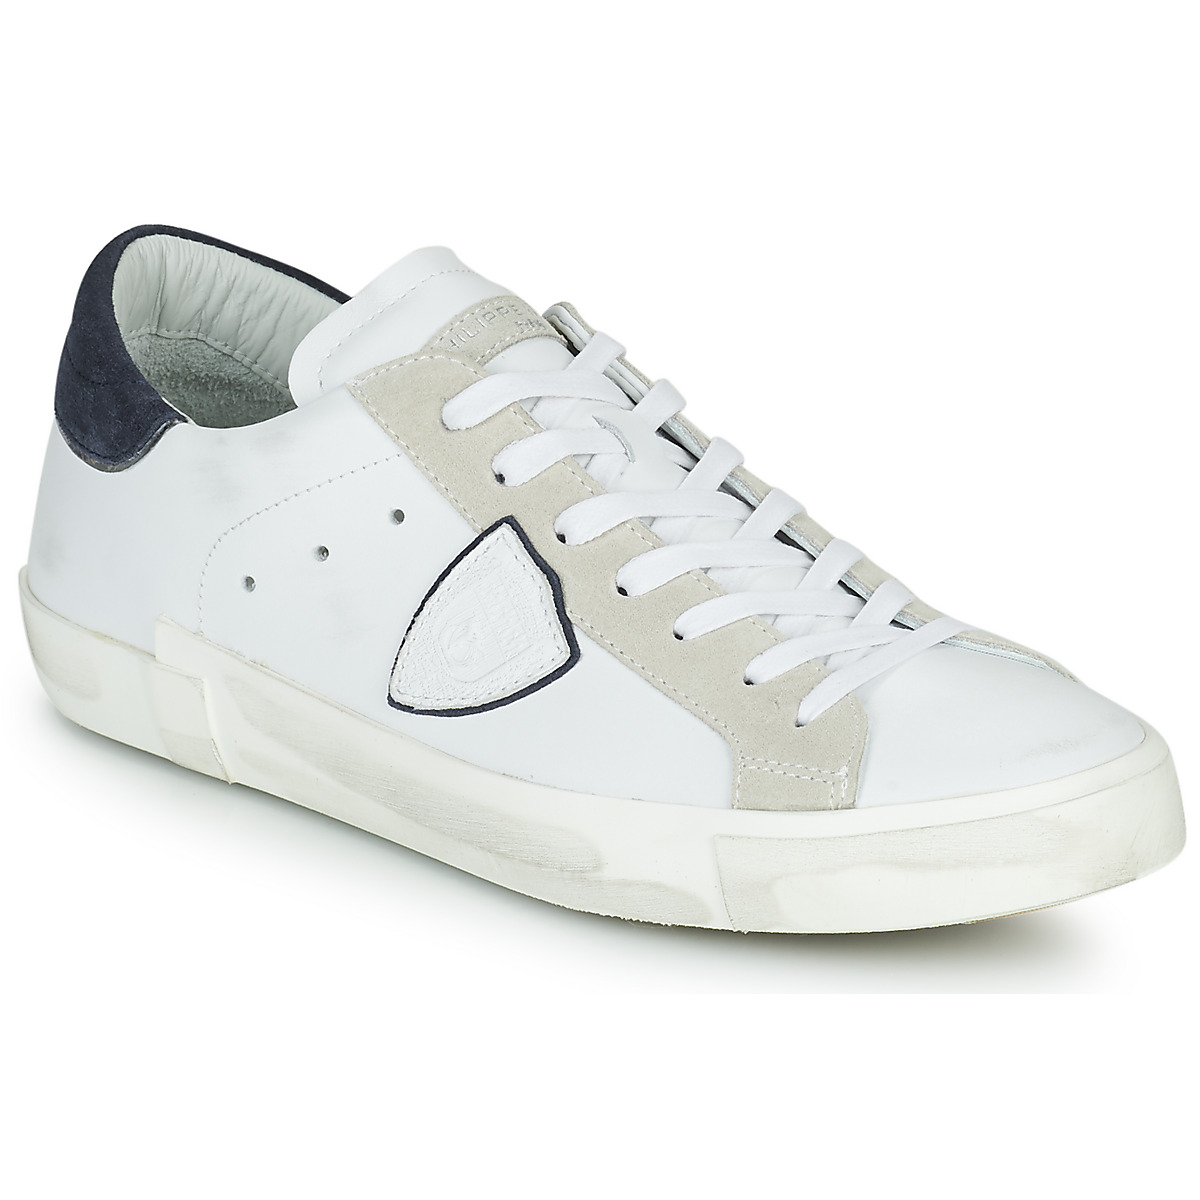 Chaussures Homme Tops, Chemisiers, Pulls, Gilets PRSX LOW MAN Blanc / Marine